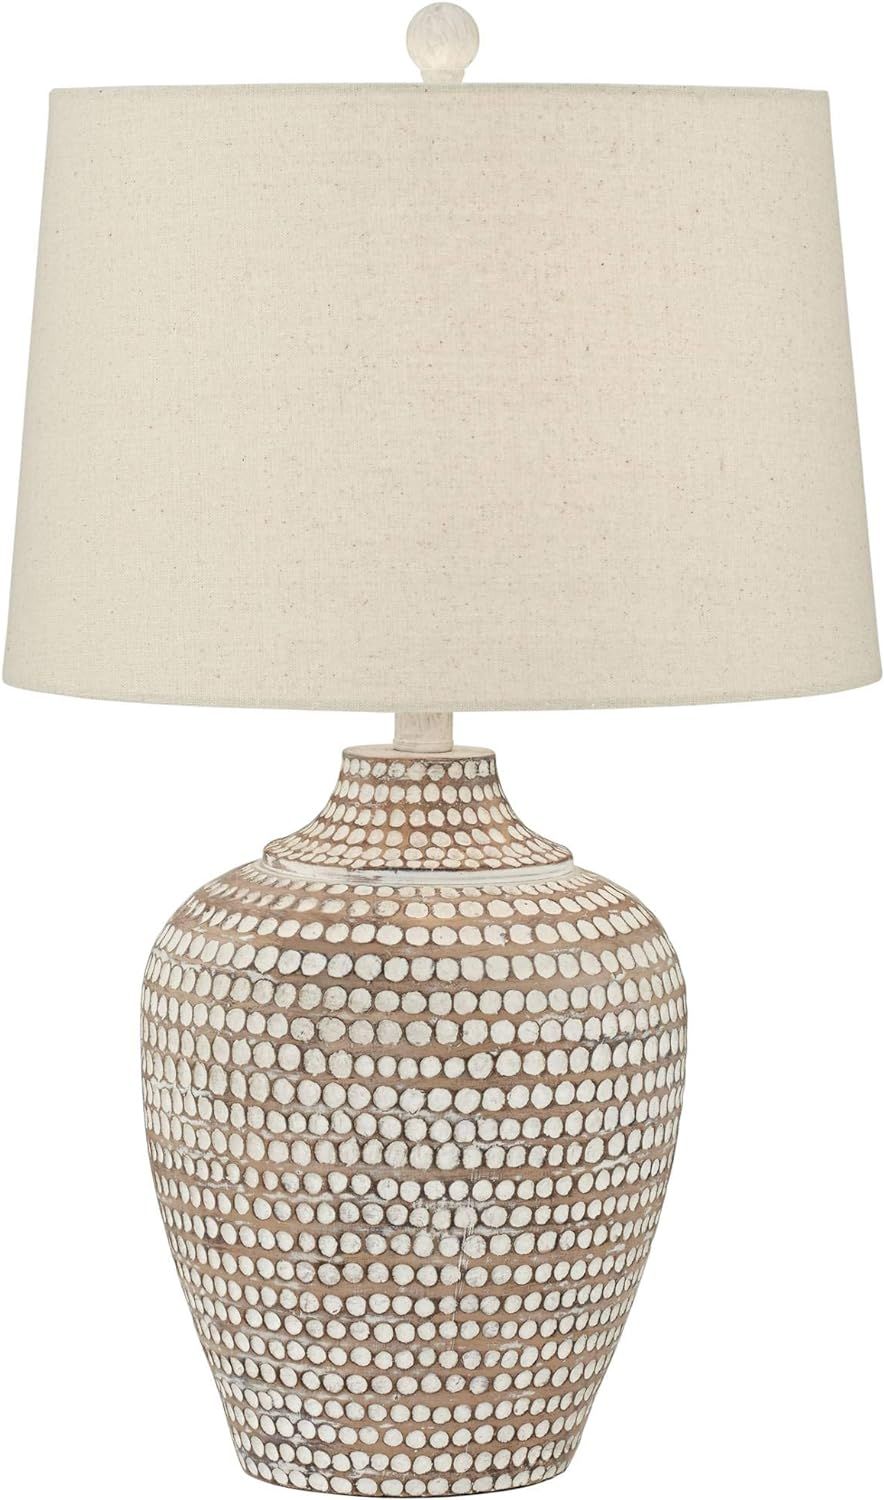 Alese Neutral Earth Finish Textured Dot Jug Table Lamp, Resin | Amazon (US)